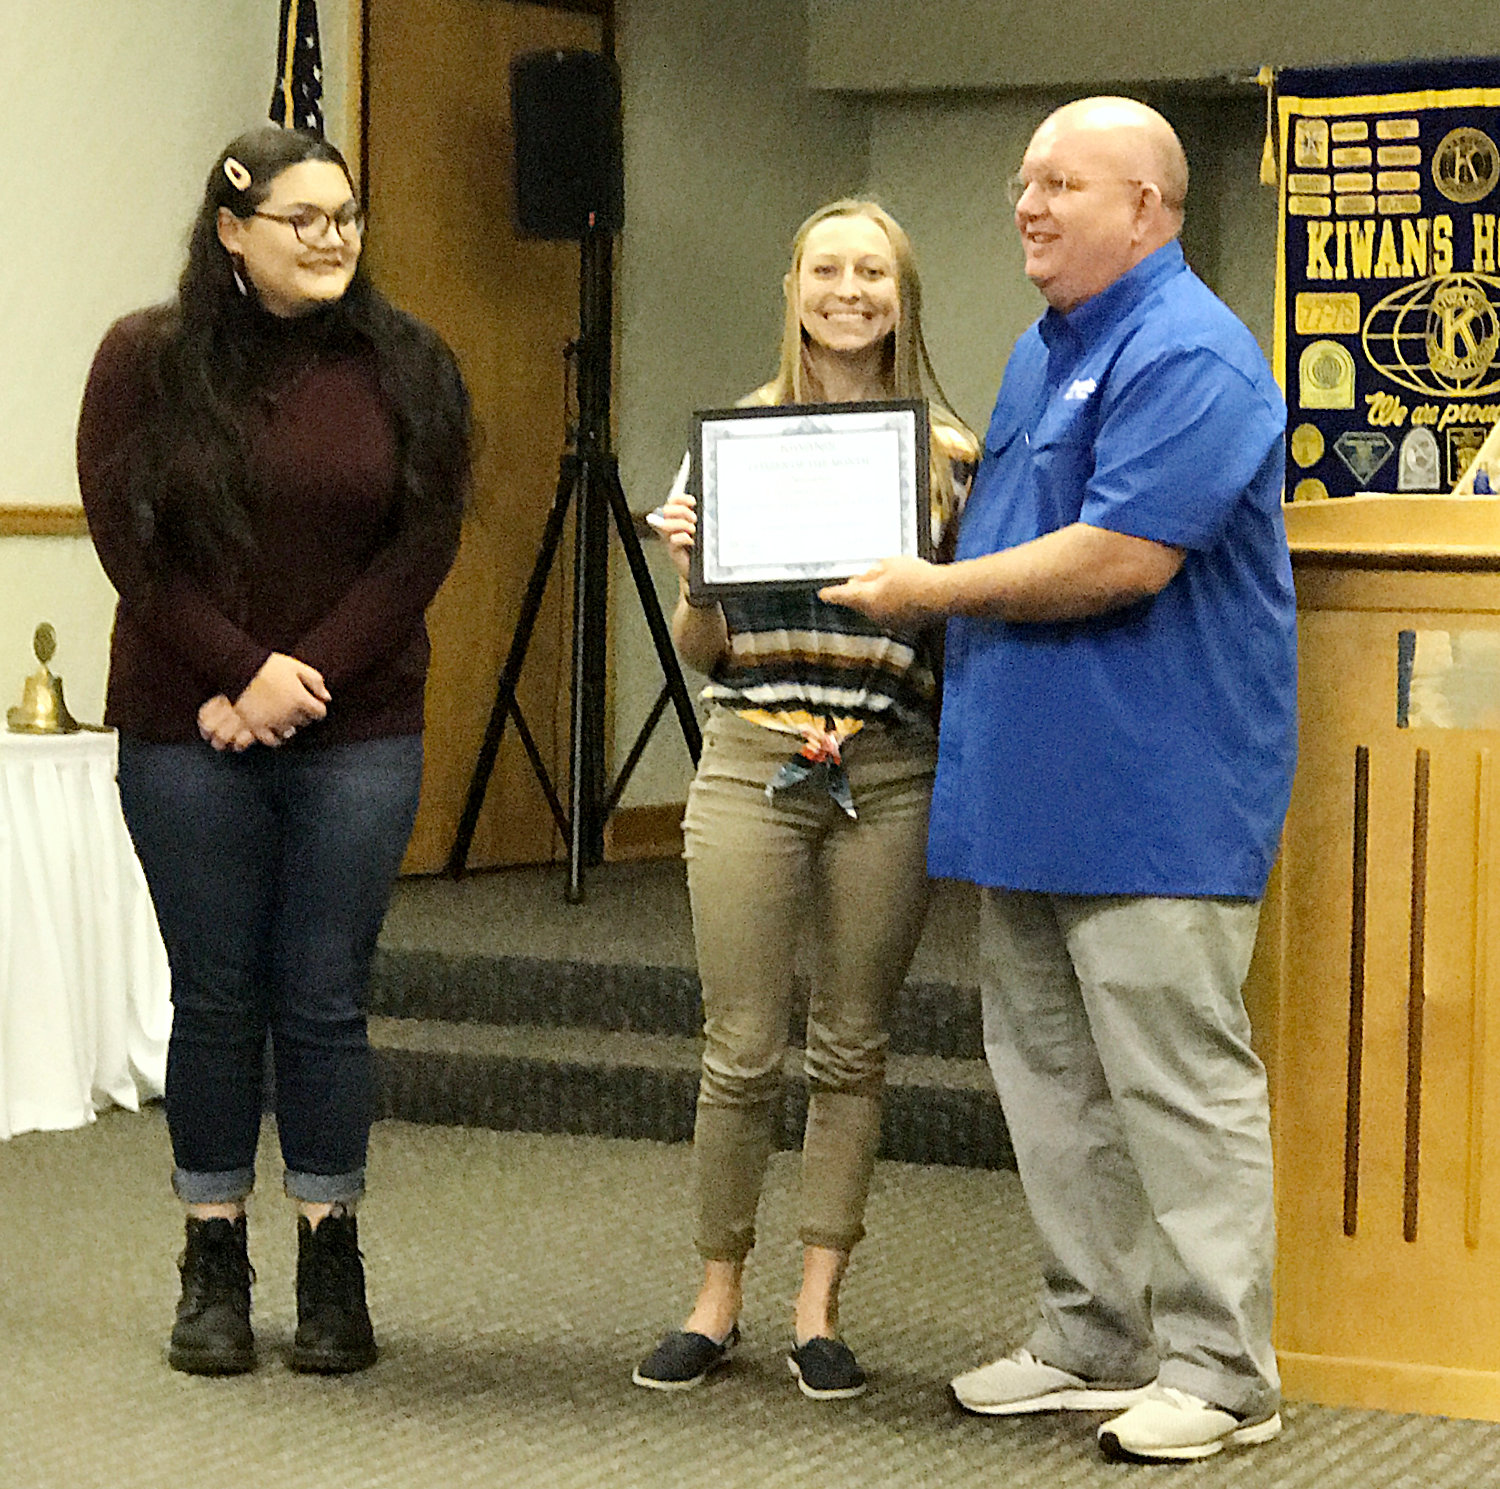 Assistant Drum Major Emily Phonsnasinh, left, and Drum Major Tristan Kirk of the Mineola High School Sound of the Swarm marching band accept the citizen of the month award on behalf of the entire state championship band from Mineola Kiwanis Club President Kevin White recently. Band director Chris Brannan was also honored.